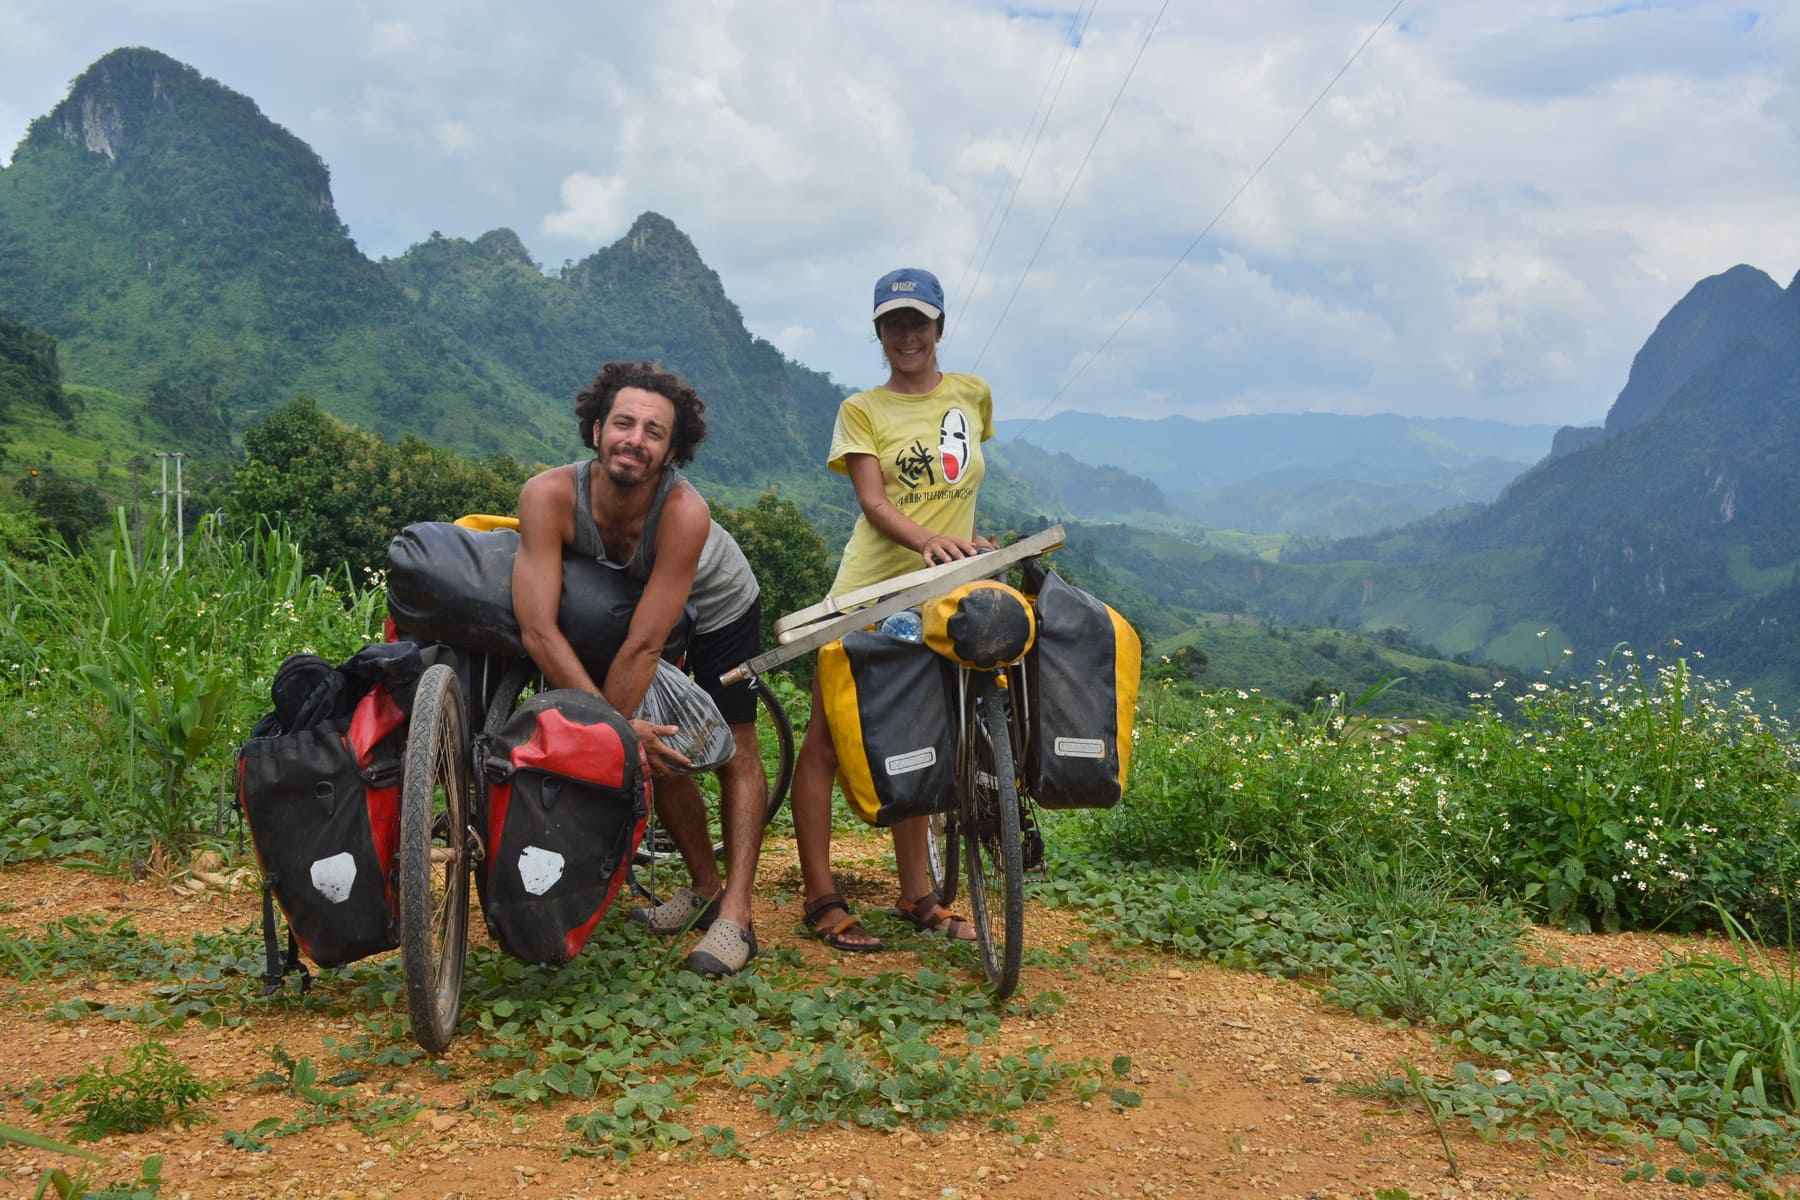 Cycloscope bicycle touring in Laos, South East Asia